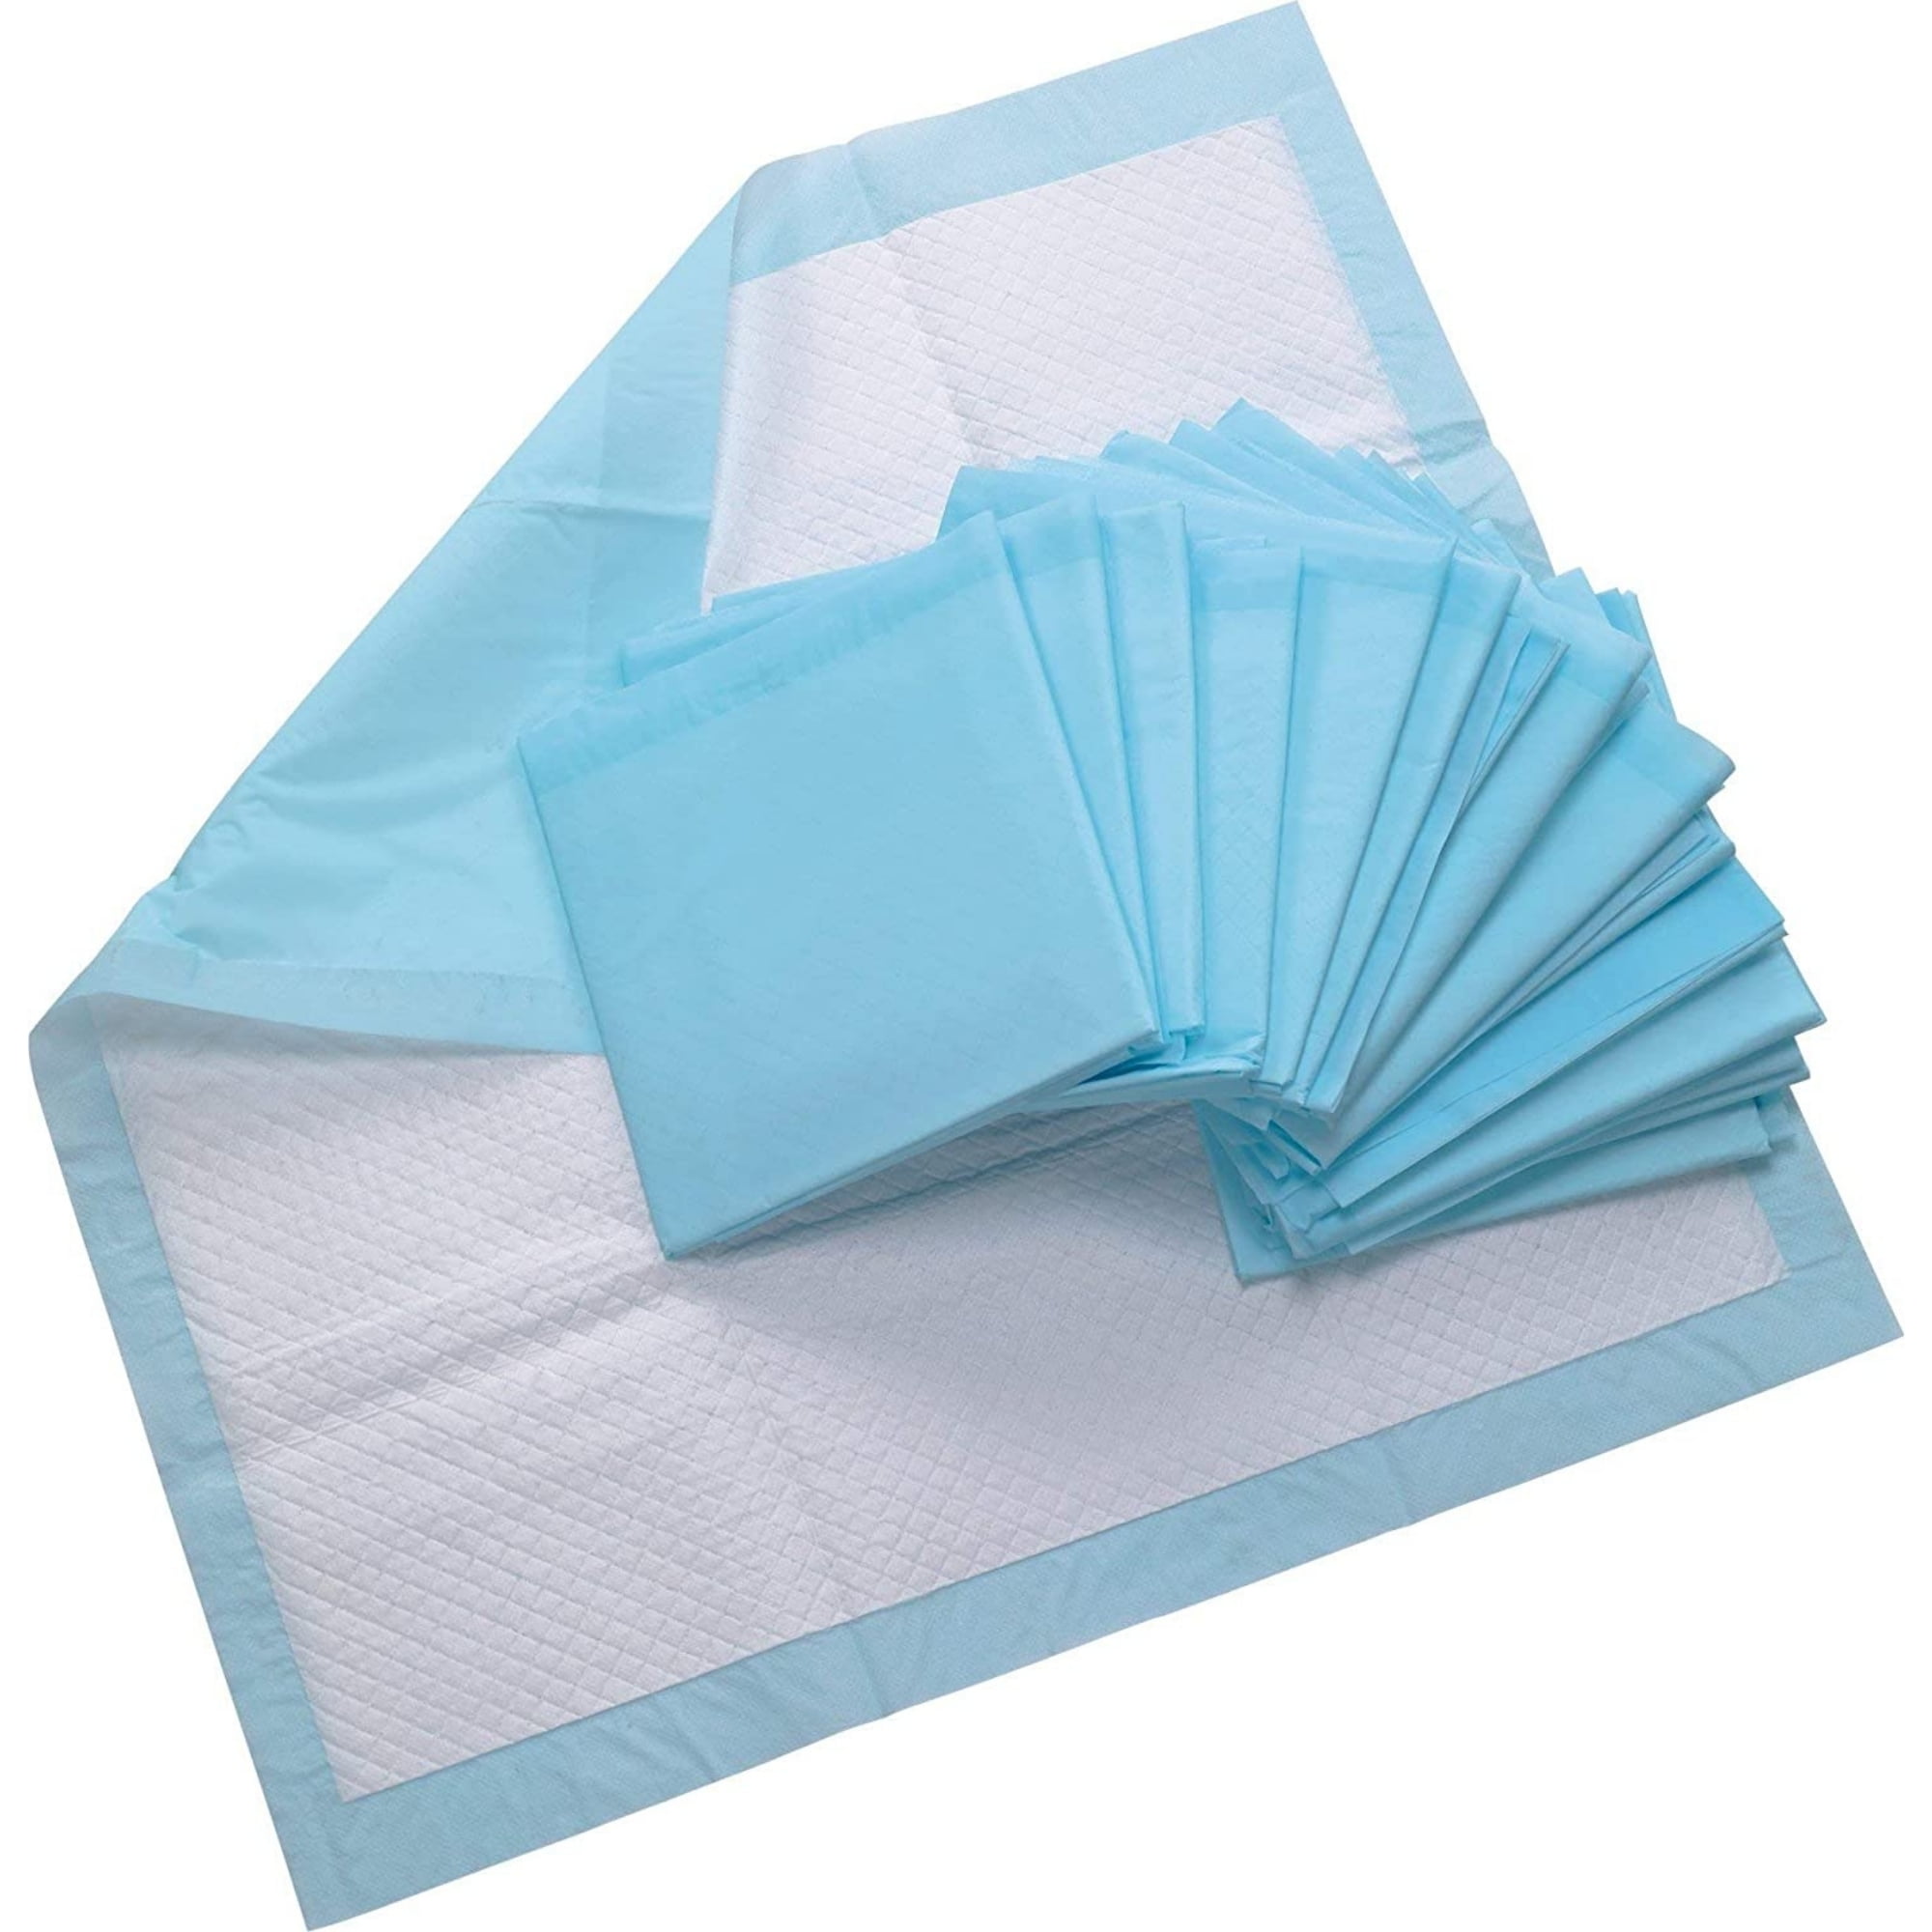 Healthline (Chux) Disposable Underpads Large 23 x 36, Waterproof Highly ...